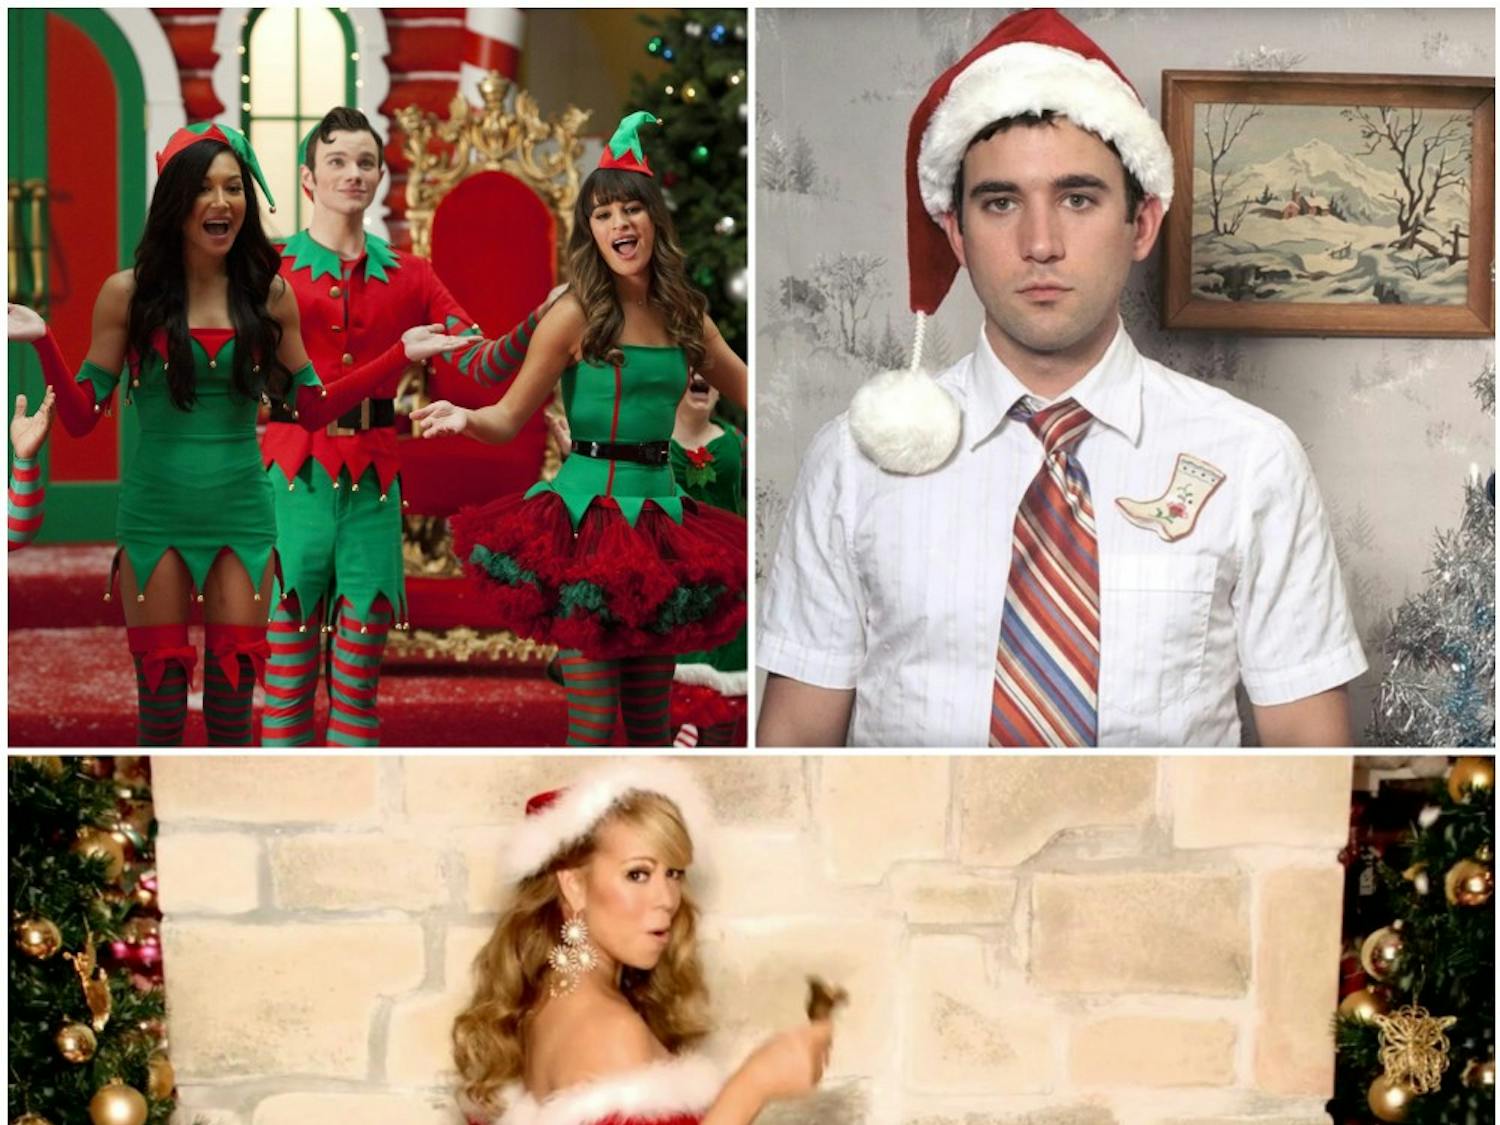 Collage includes images of artists from Glee, Sufjan Stevens and Mariah Carey.